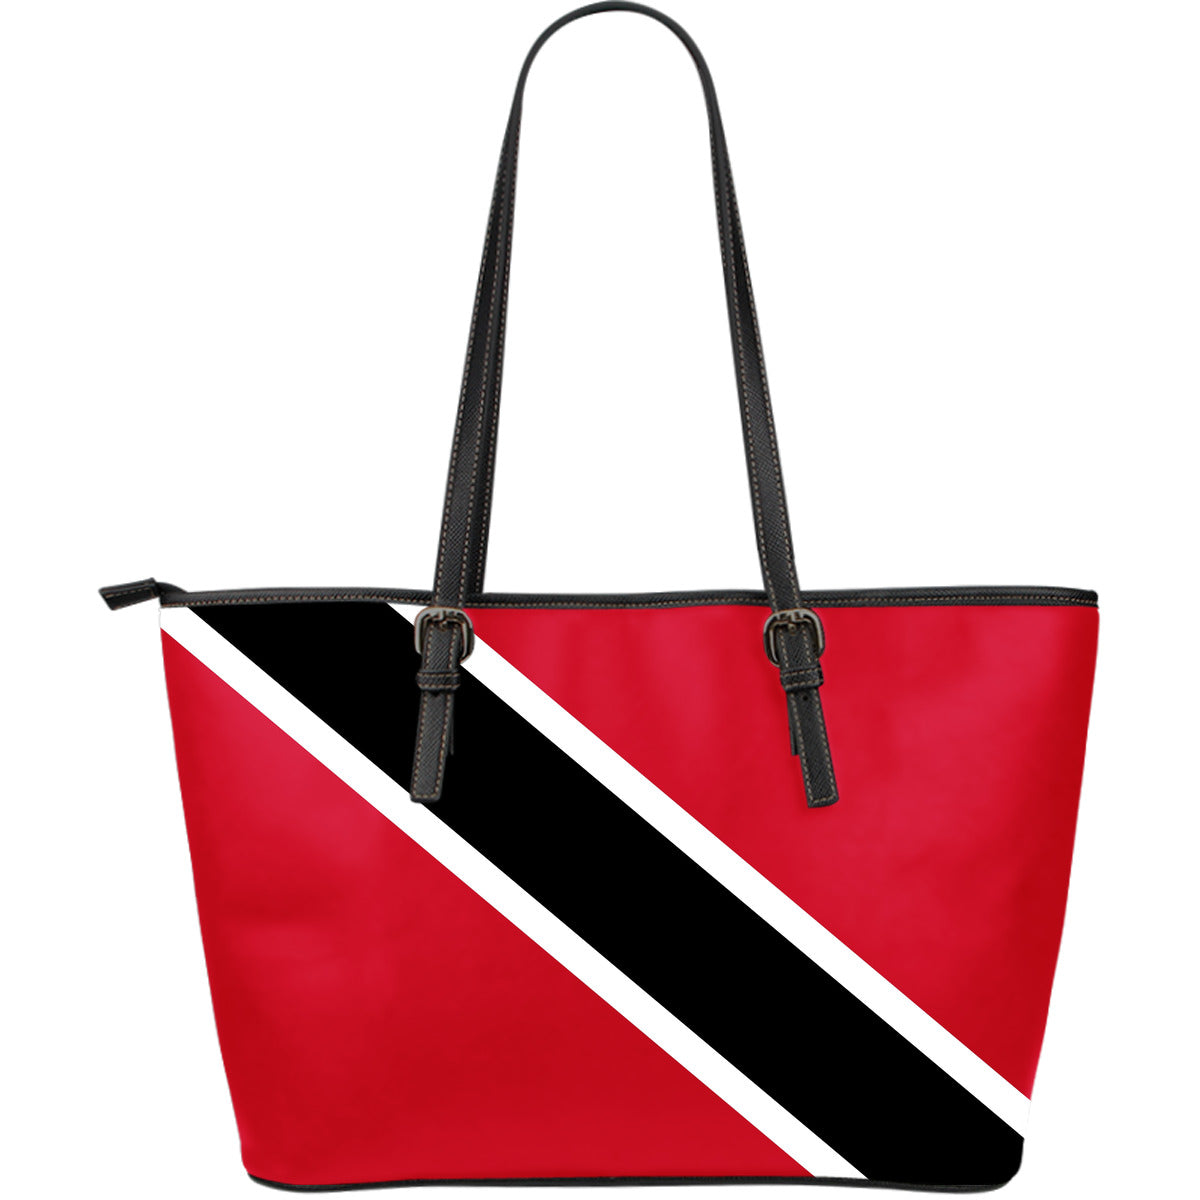 Trinidad and Tobago - Large Leather Tote Bag - JaZazzy 